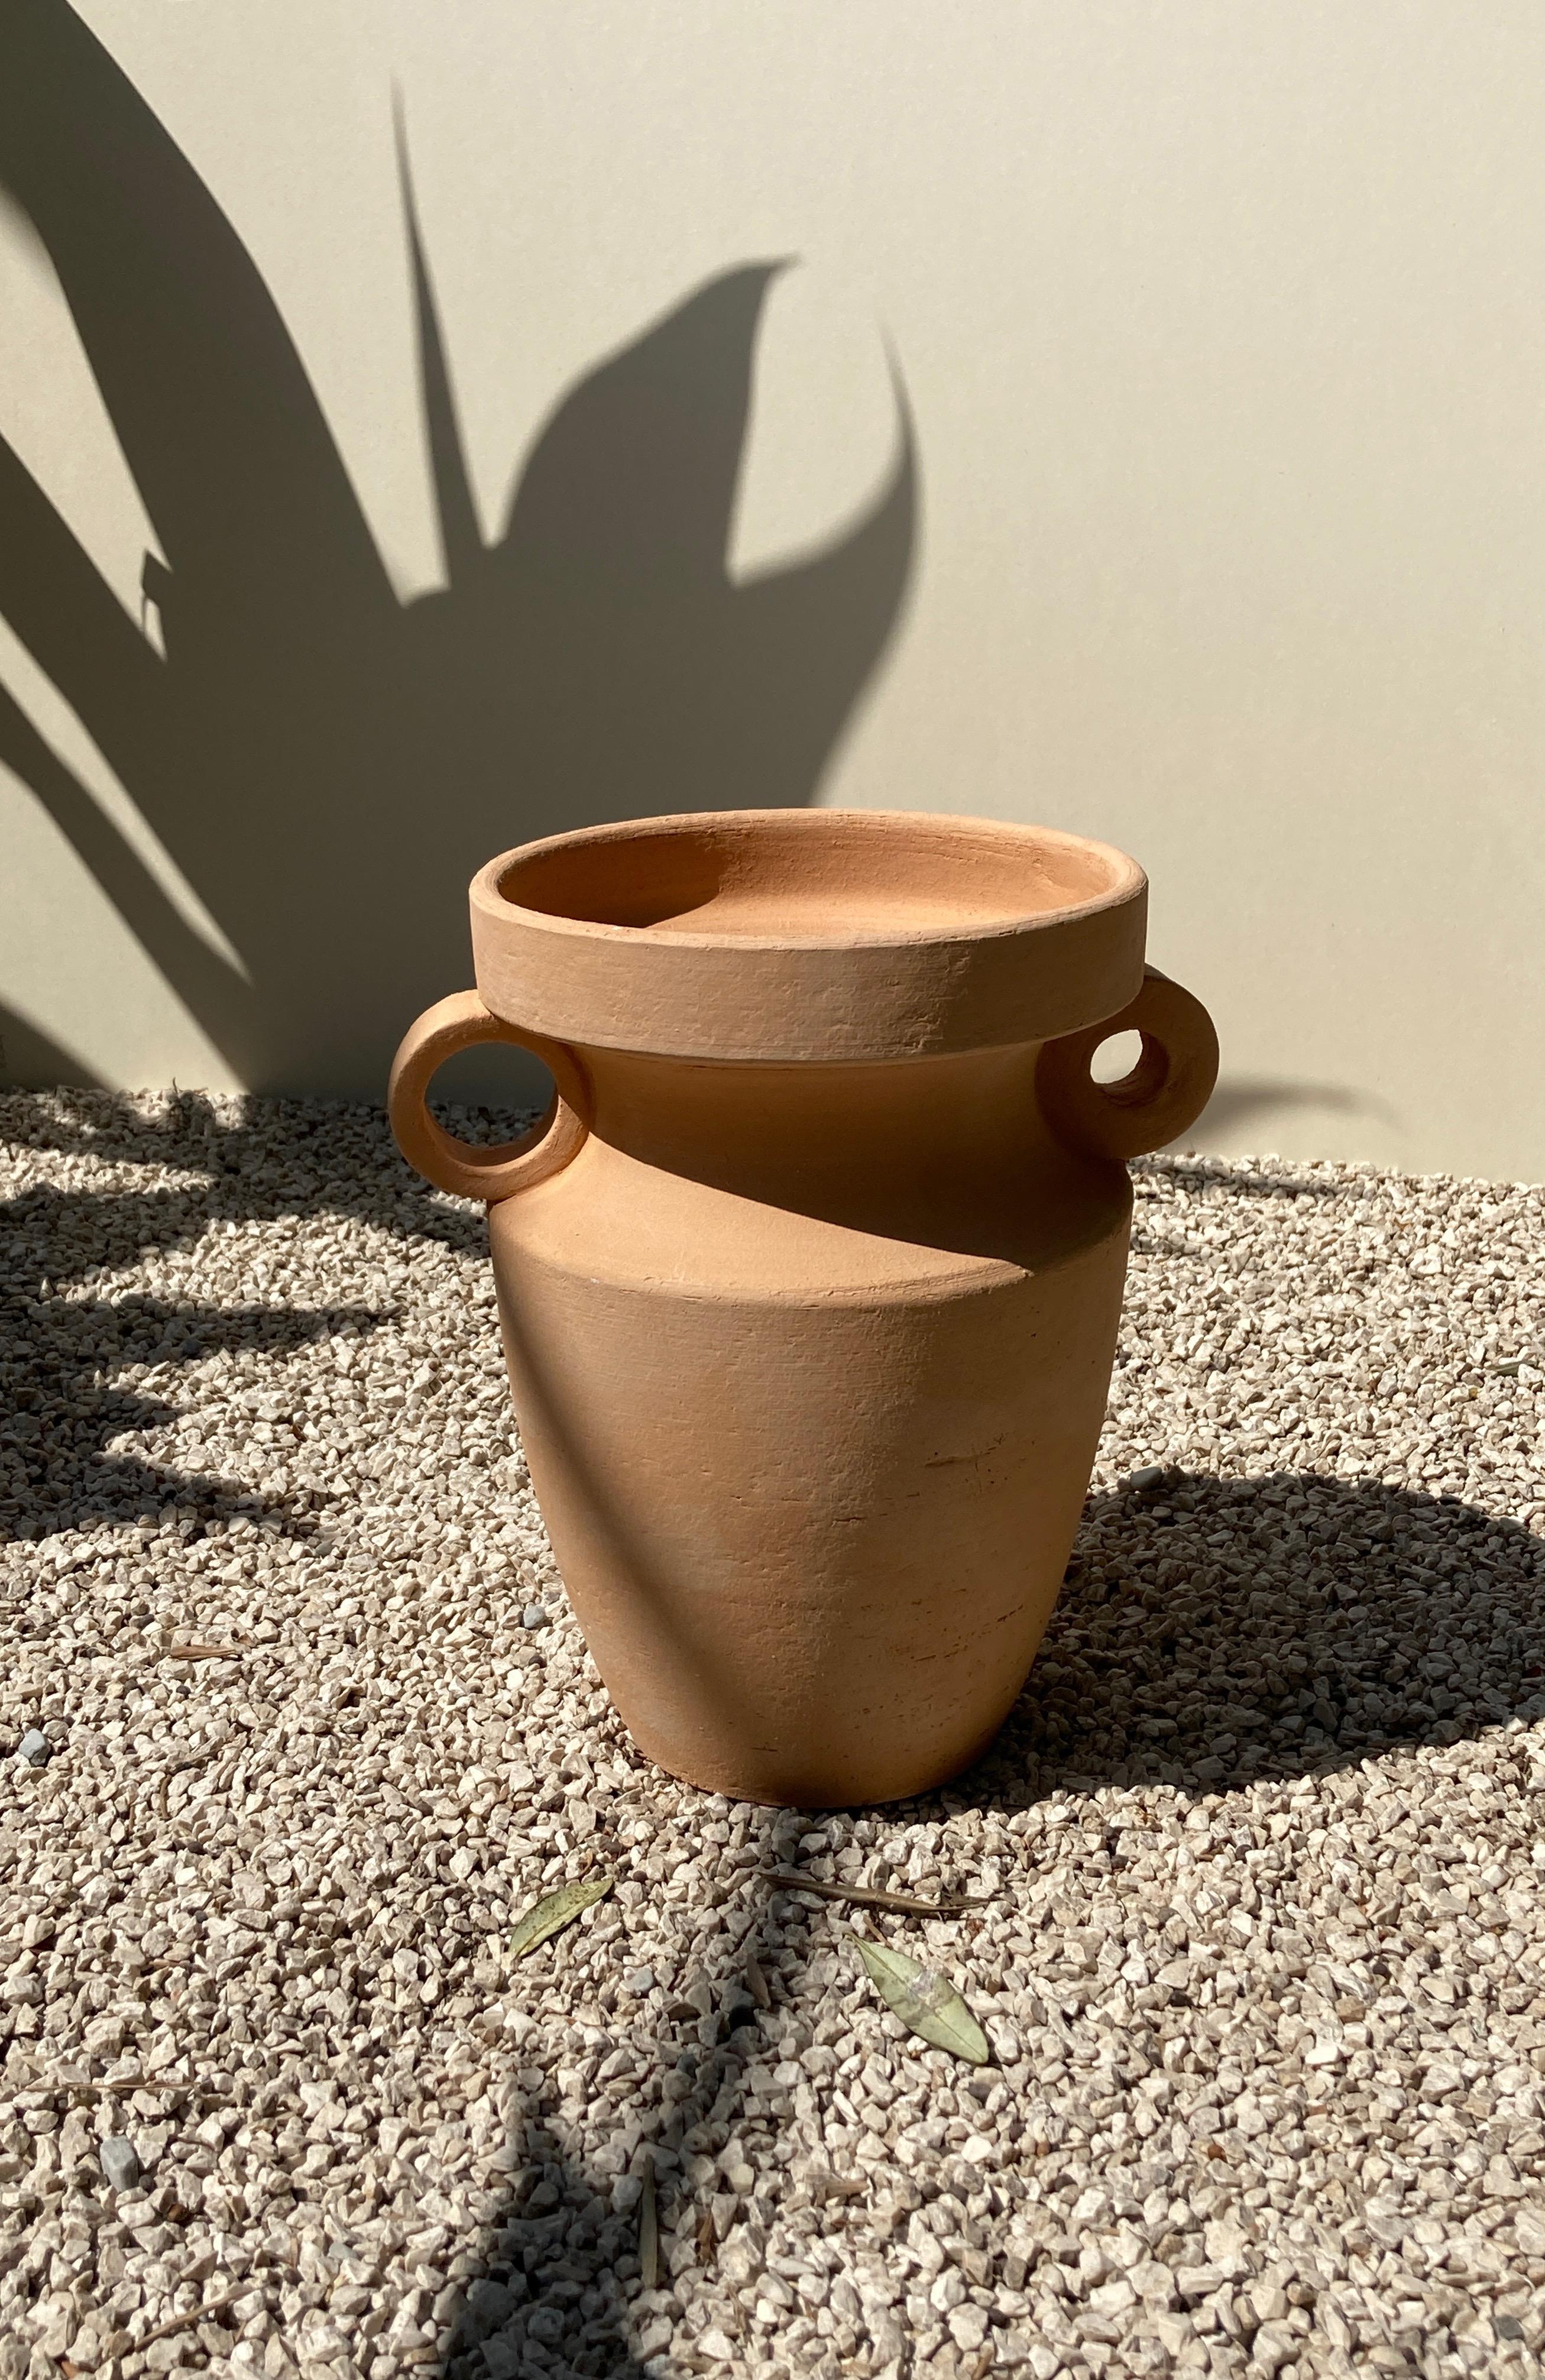 Large Terracotta Les Inseparables whole flower vase by Lea Ginac
Limited edition of 3. 
Dimensions: diameter 45 x height 52 cm 
Materials: Chamotte earth in white or terracotta
Technique: hand-modeling.
Available in two colors, terra cotta, and